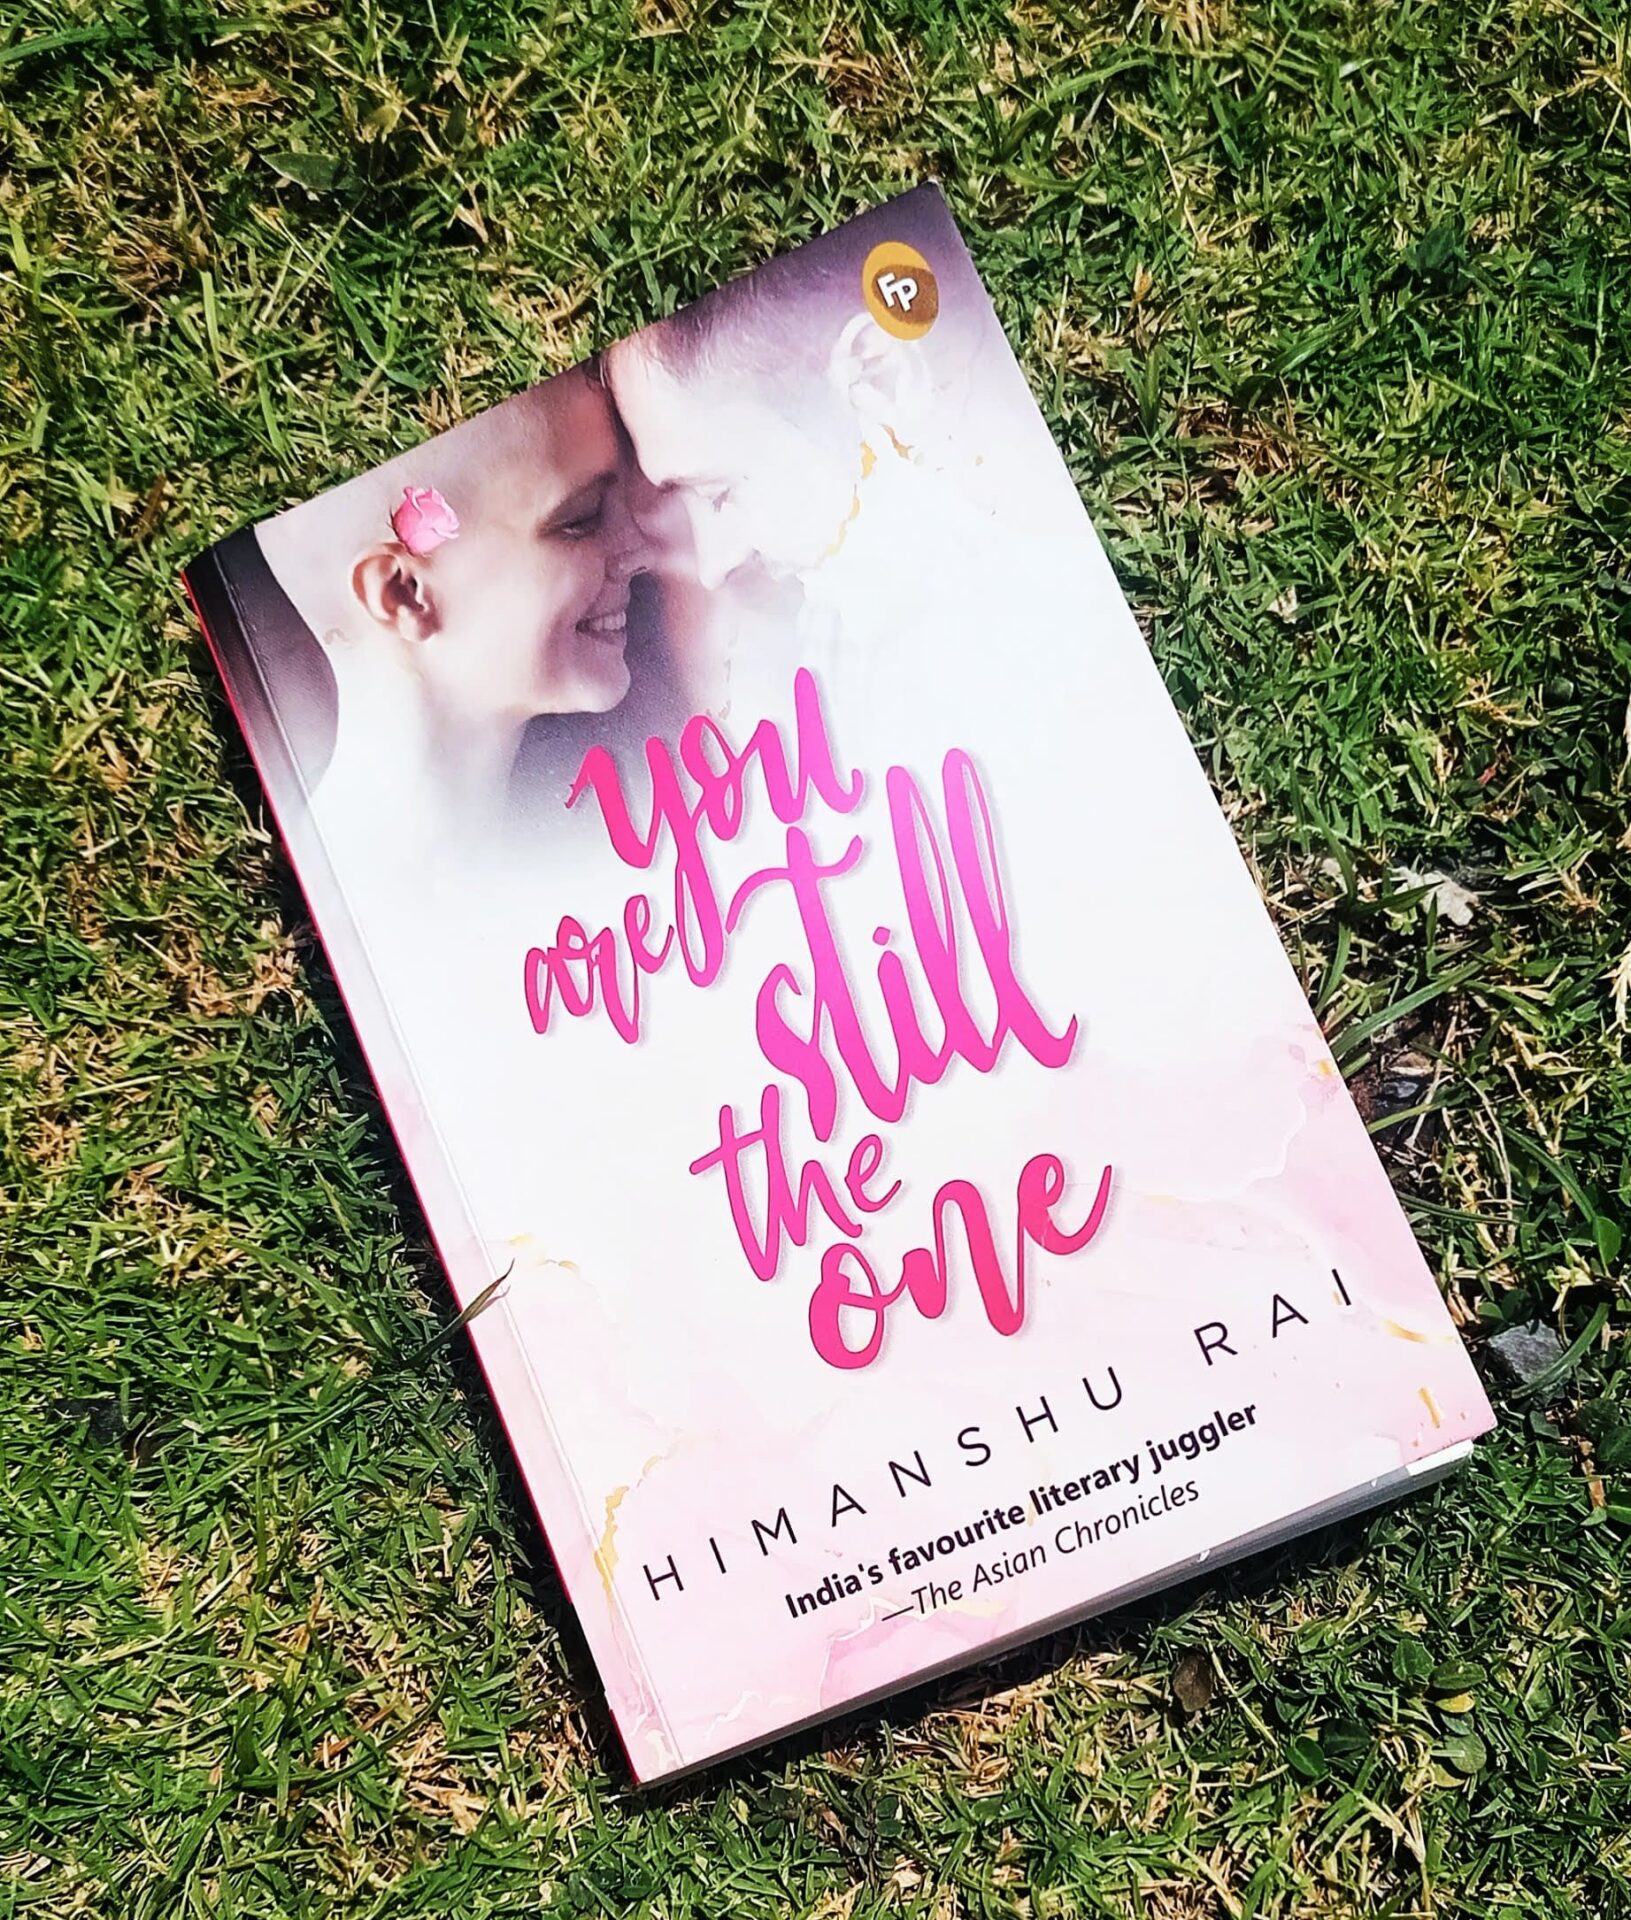 You are still the one : Honest Review